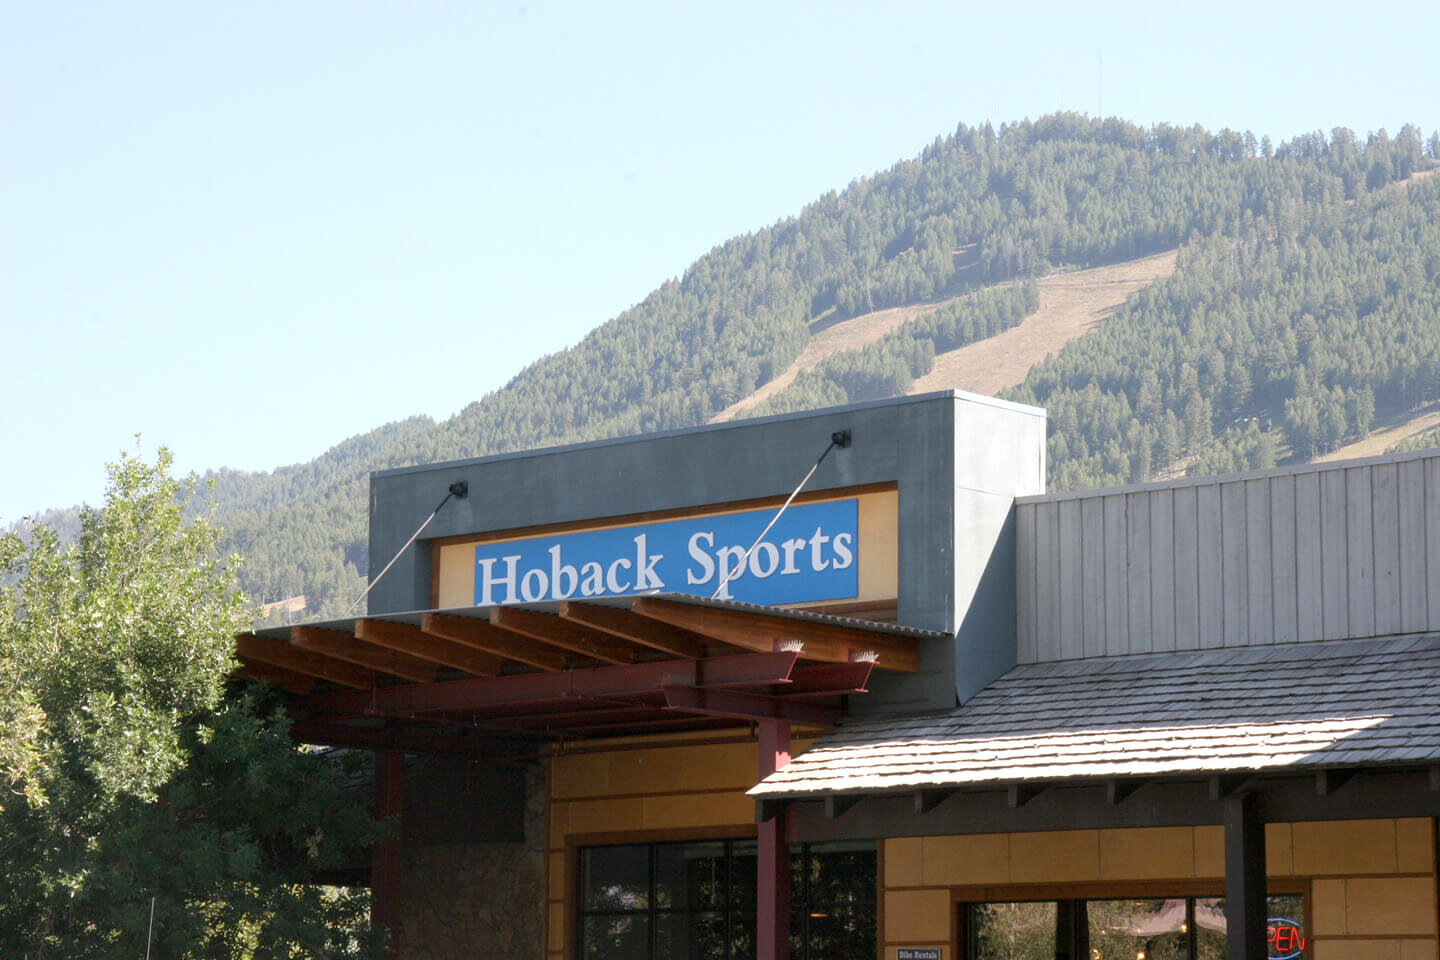 Hoback Sports store front awning with signage